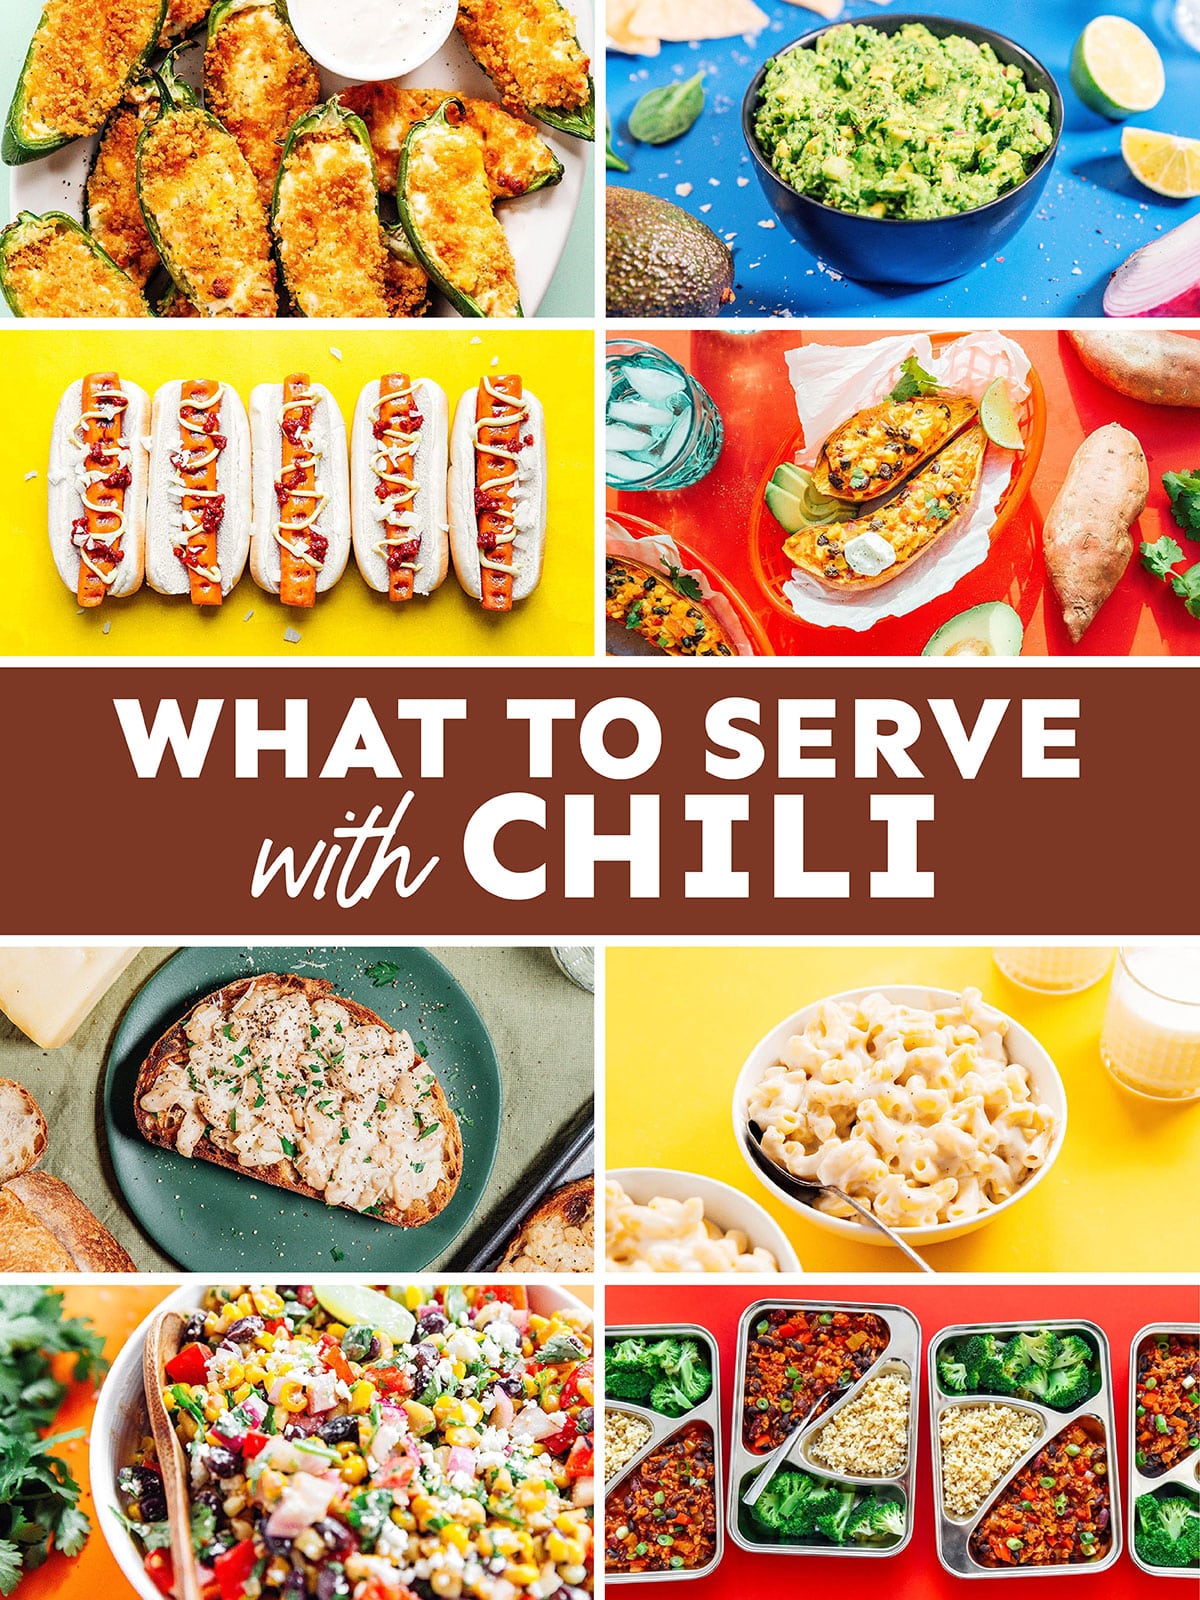 Collage that says "what to serve with chili".